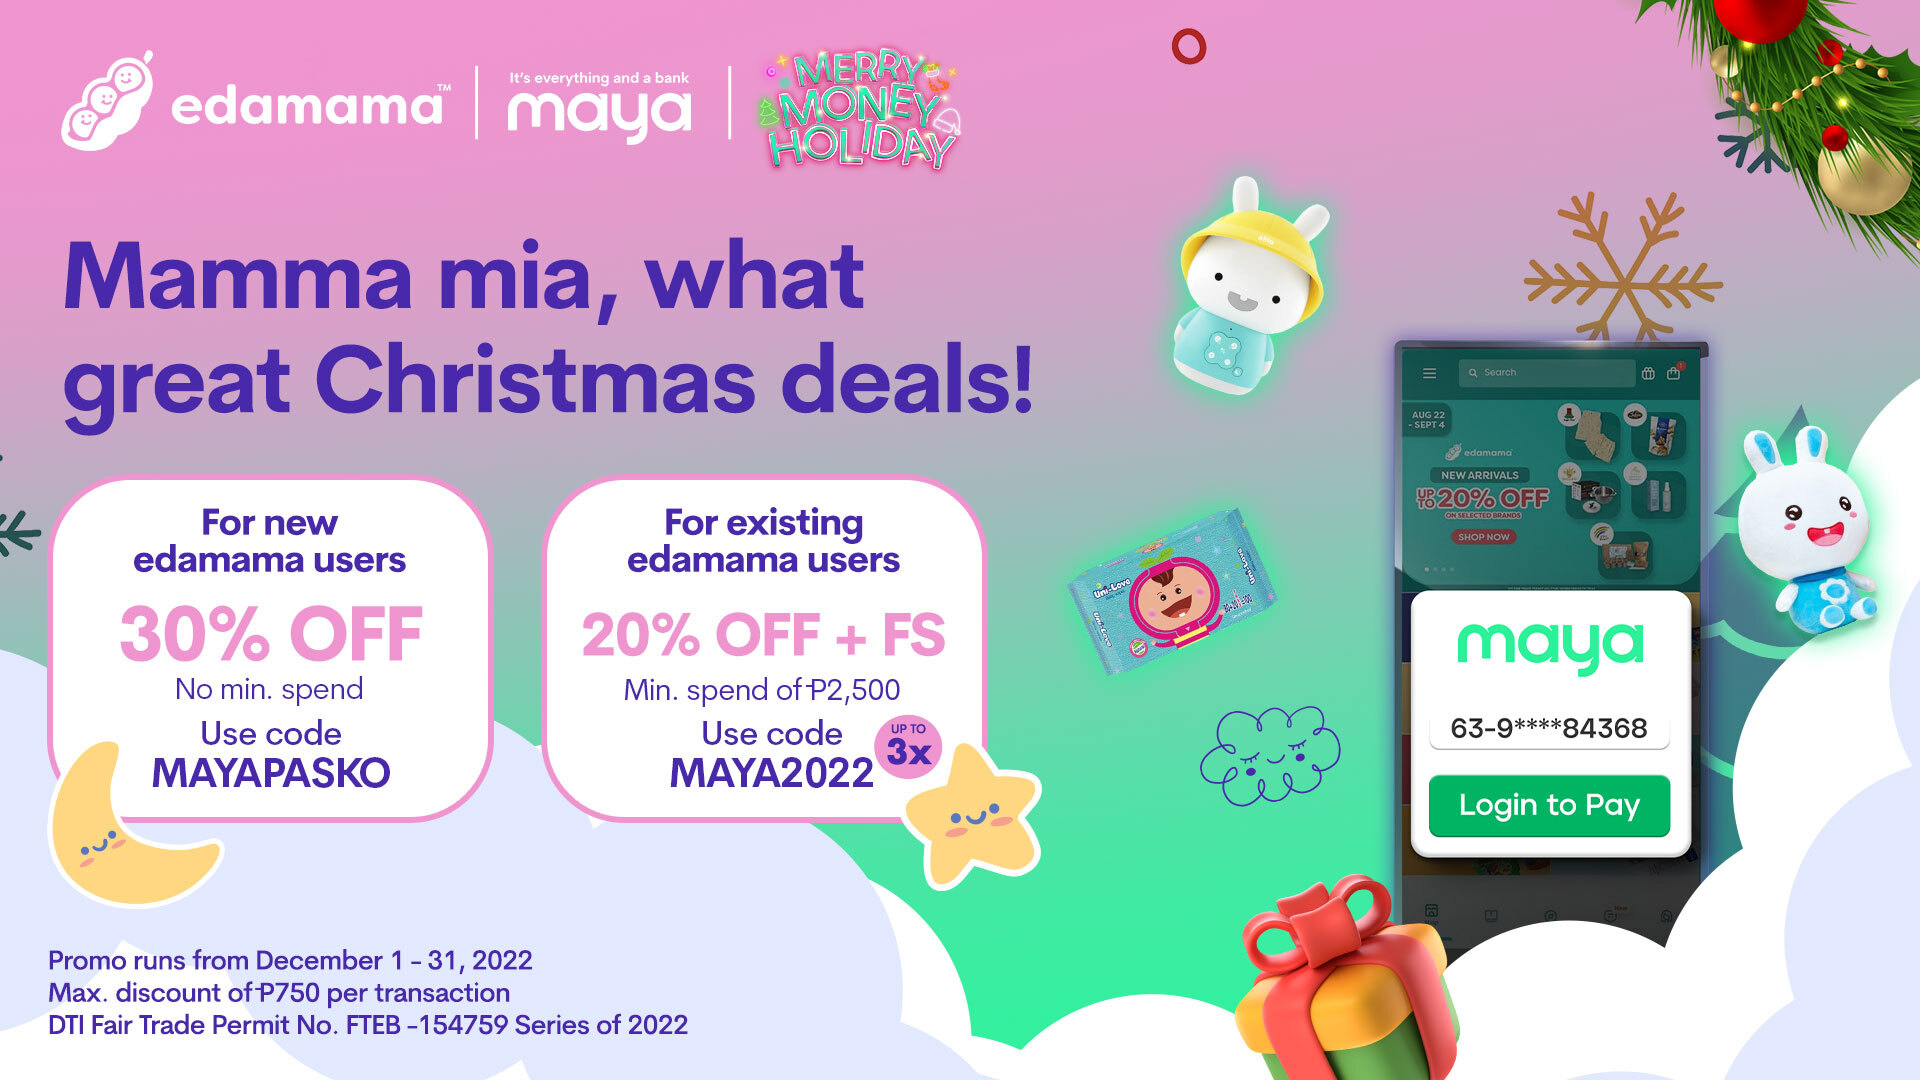 Get up to 30% off on edamama when you pay with Maya this holiday season!